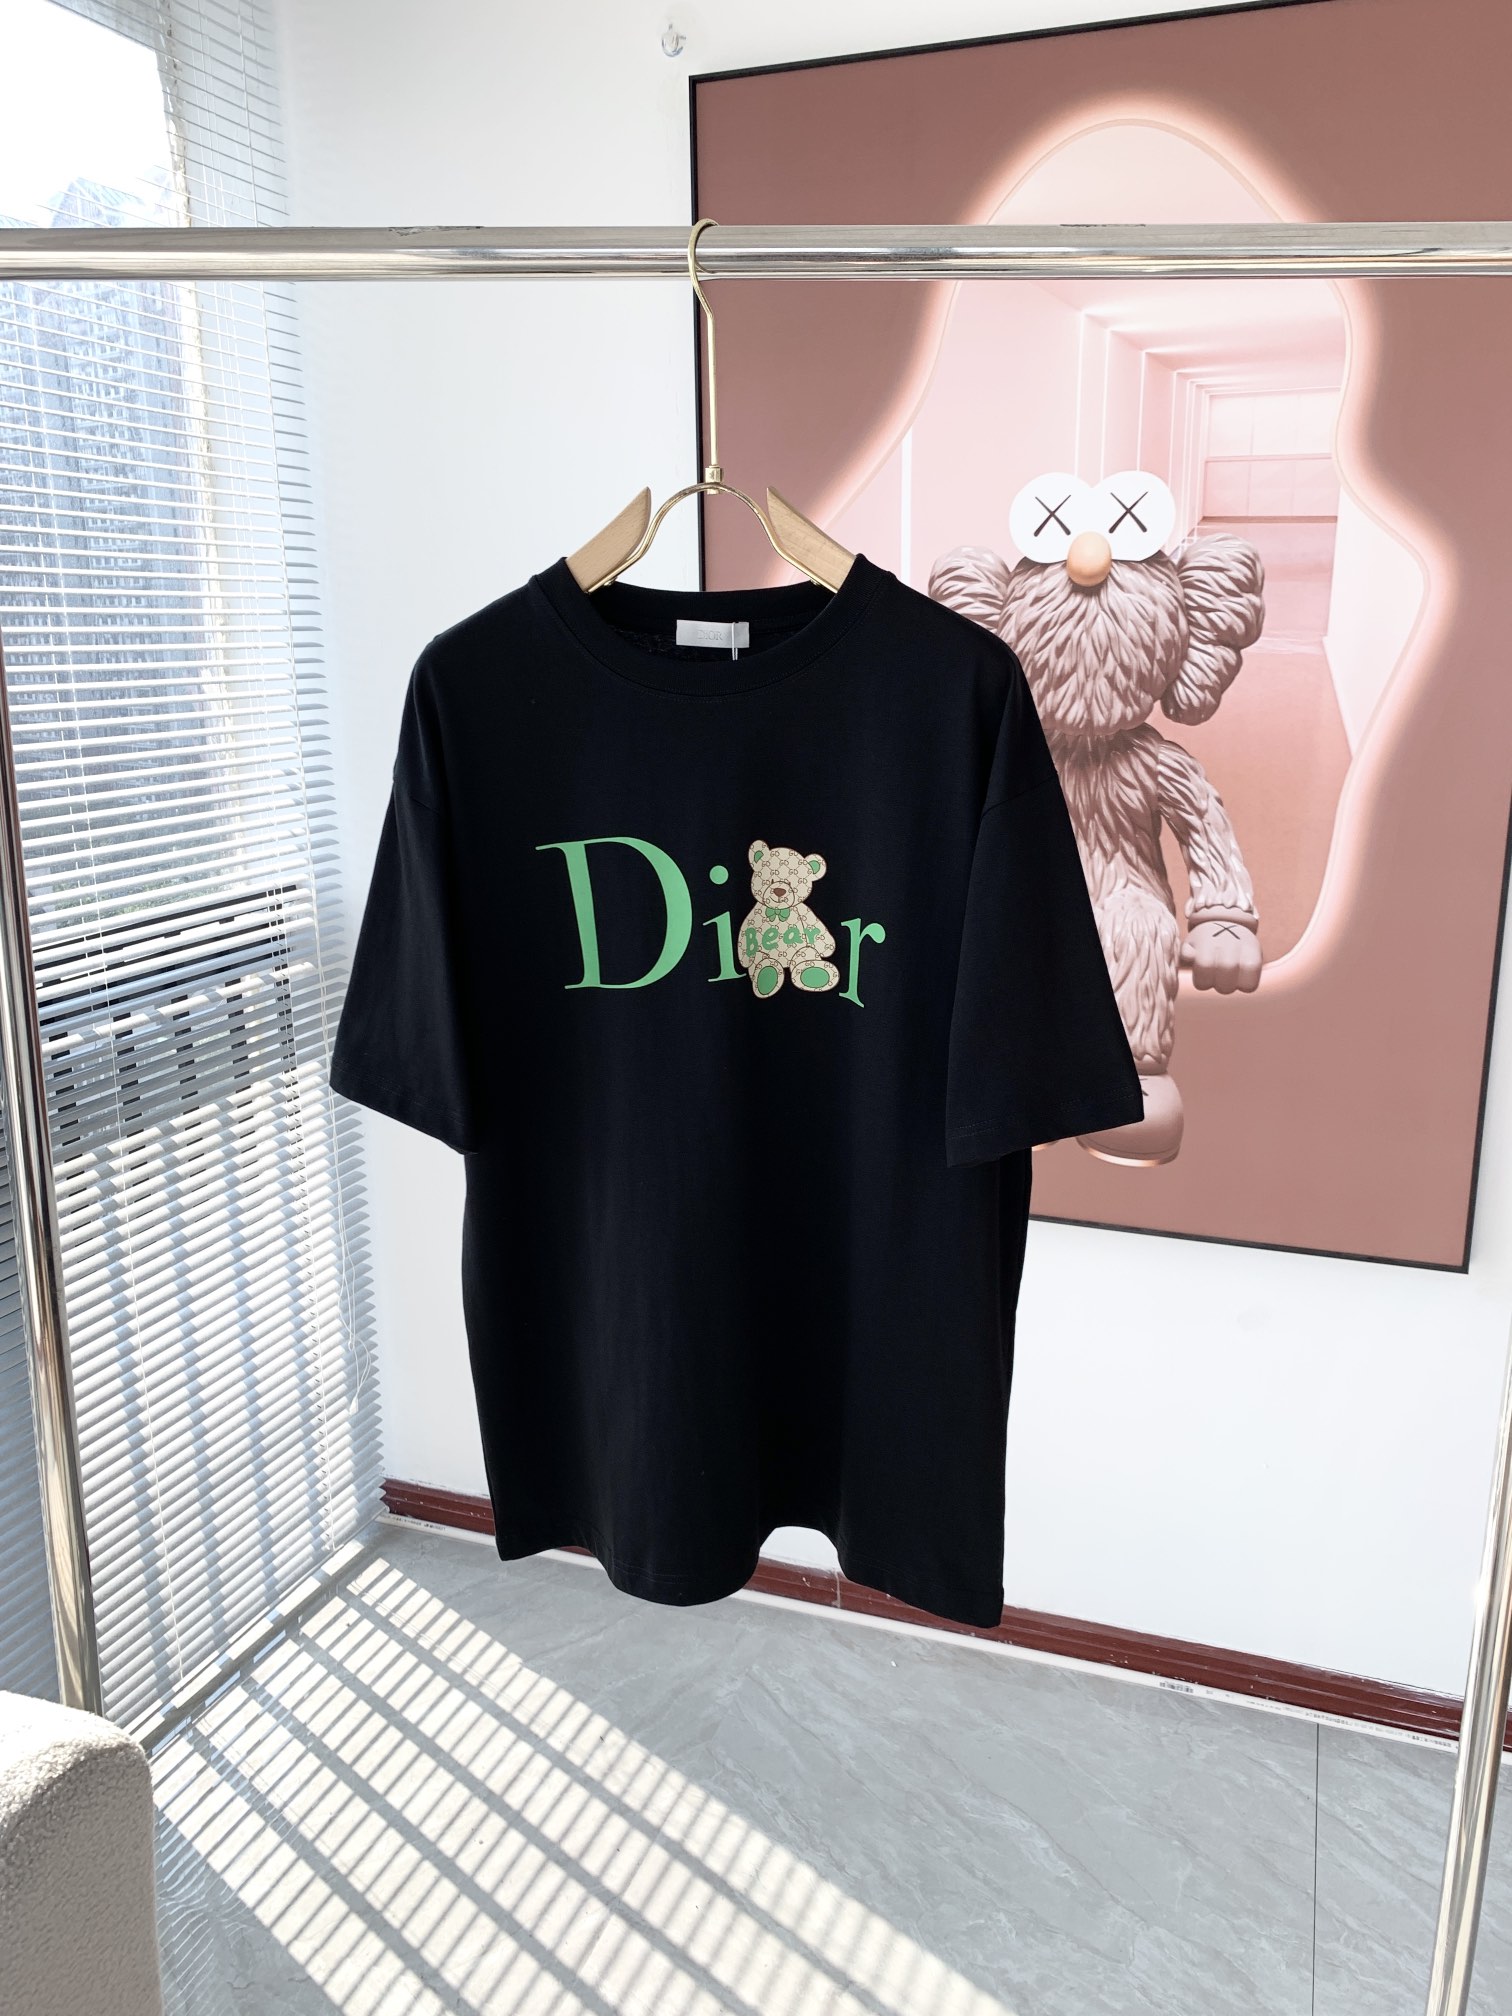 Dior Clothing T-Shirt Unisex Cotton Spring/Summer Collection Short Sleeve